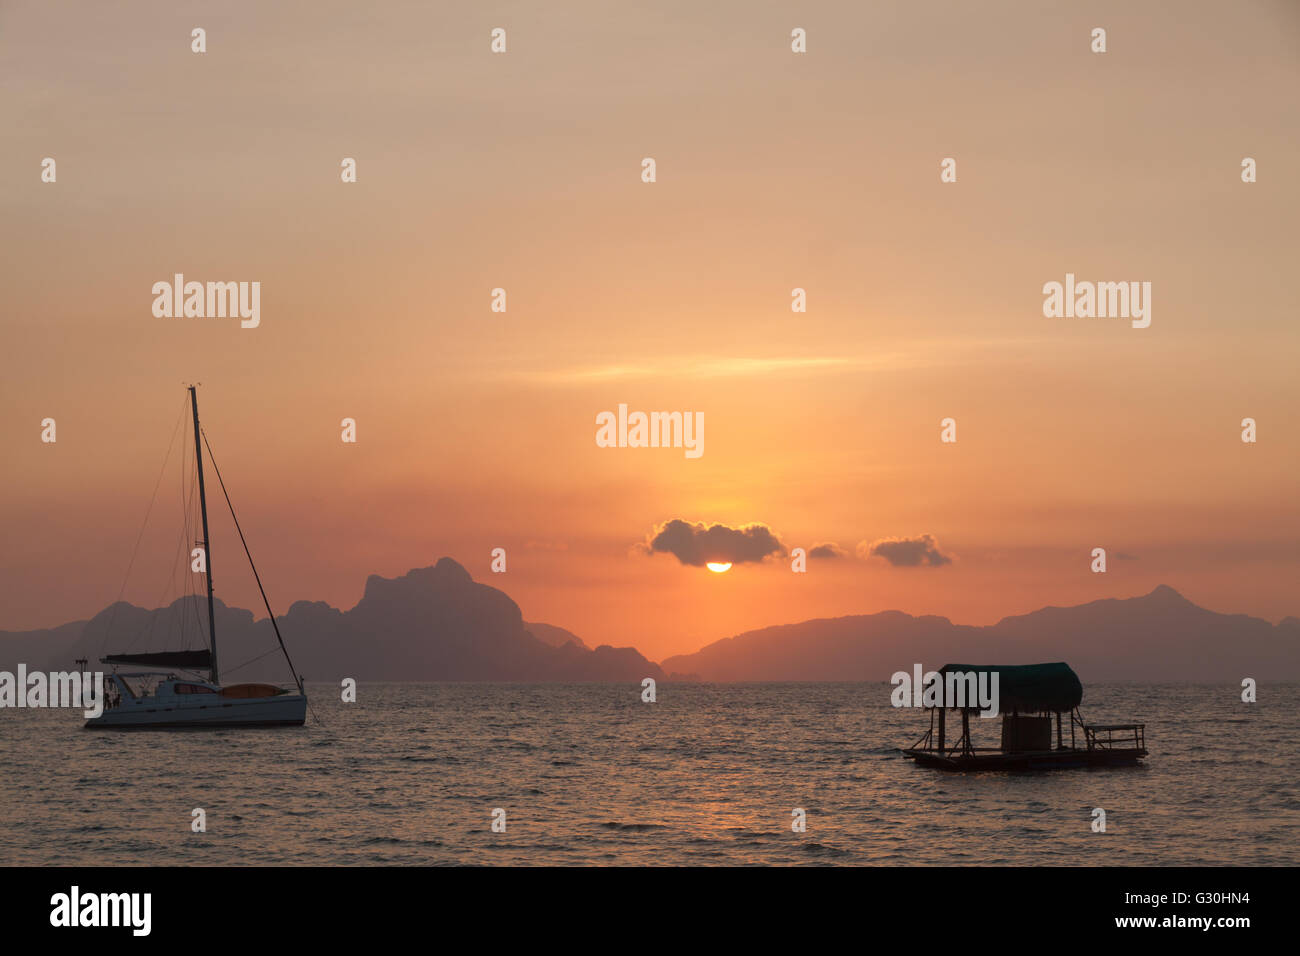 Sunset with fishing boat - Donsol Philippines Stock Photo